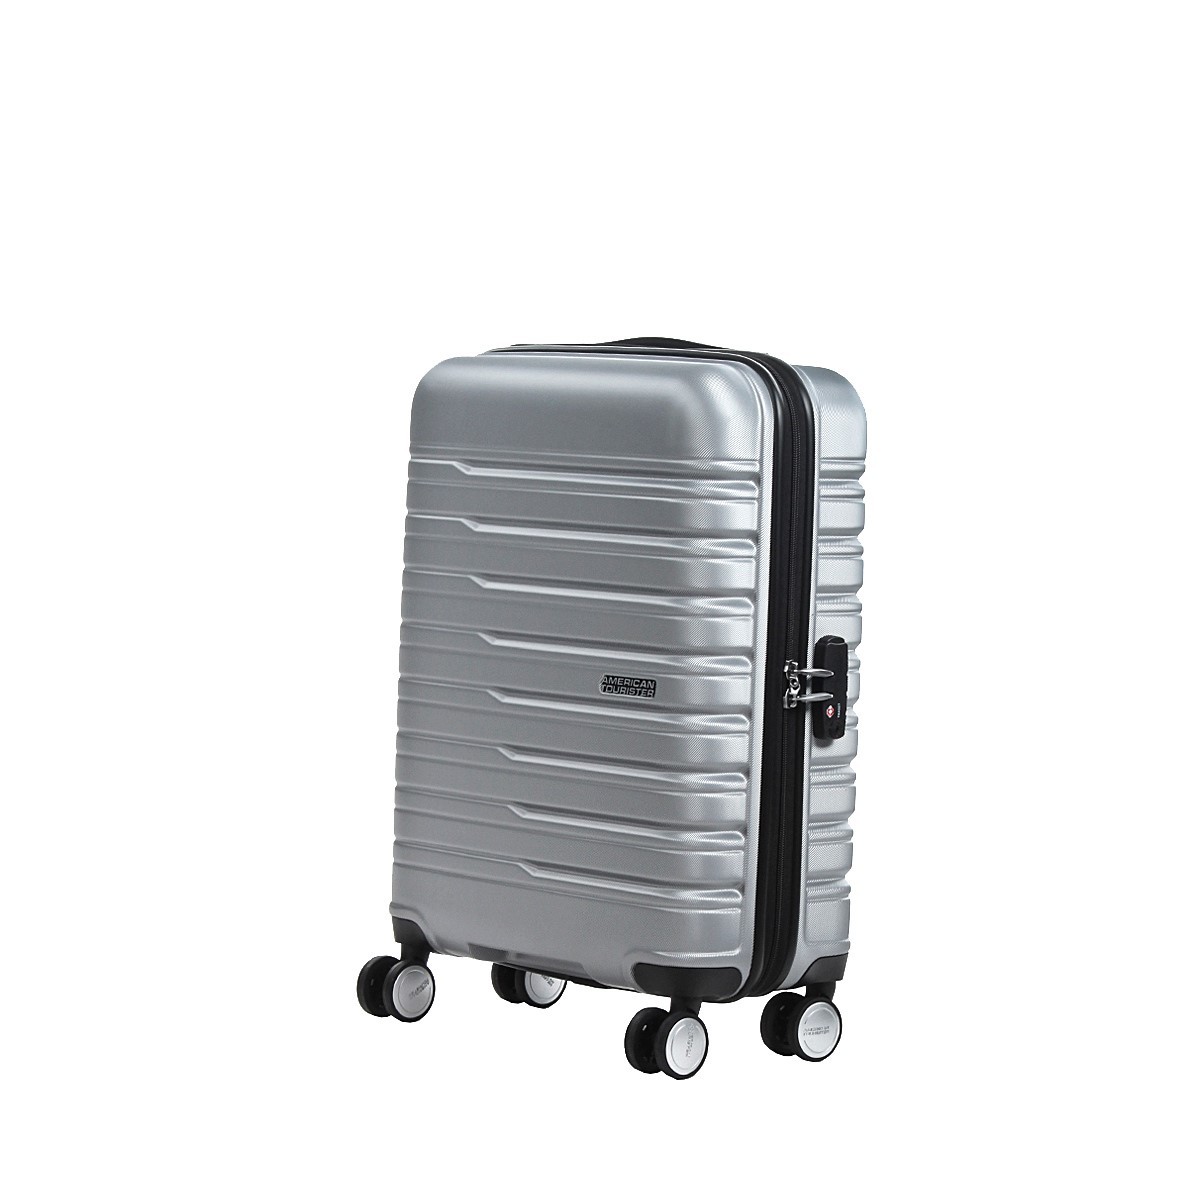 American tourister by samsonite Spinner cabina 4 ruote Argento Flashline ME8*25001